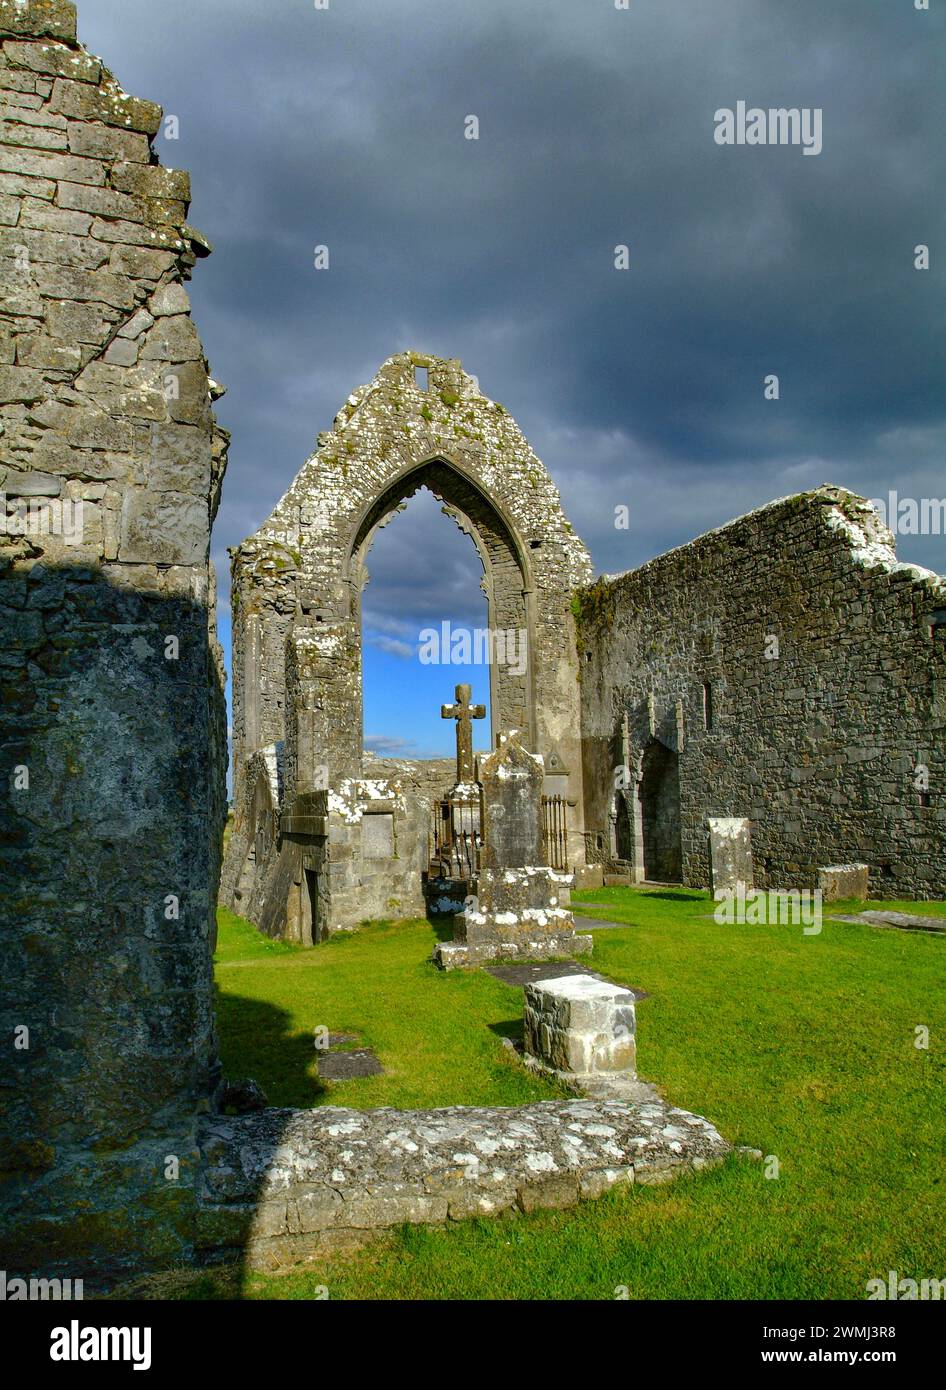 Roscommon Dominican Friary, comté de Roscommon, Irlande Banque D'Images